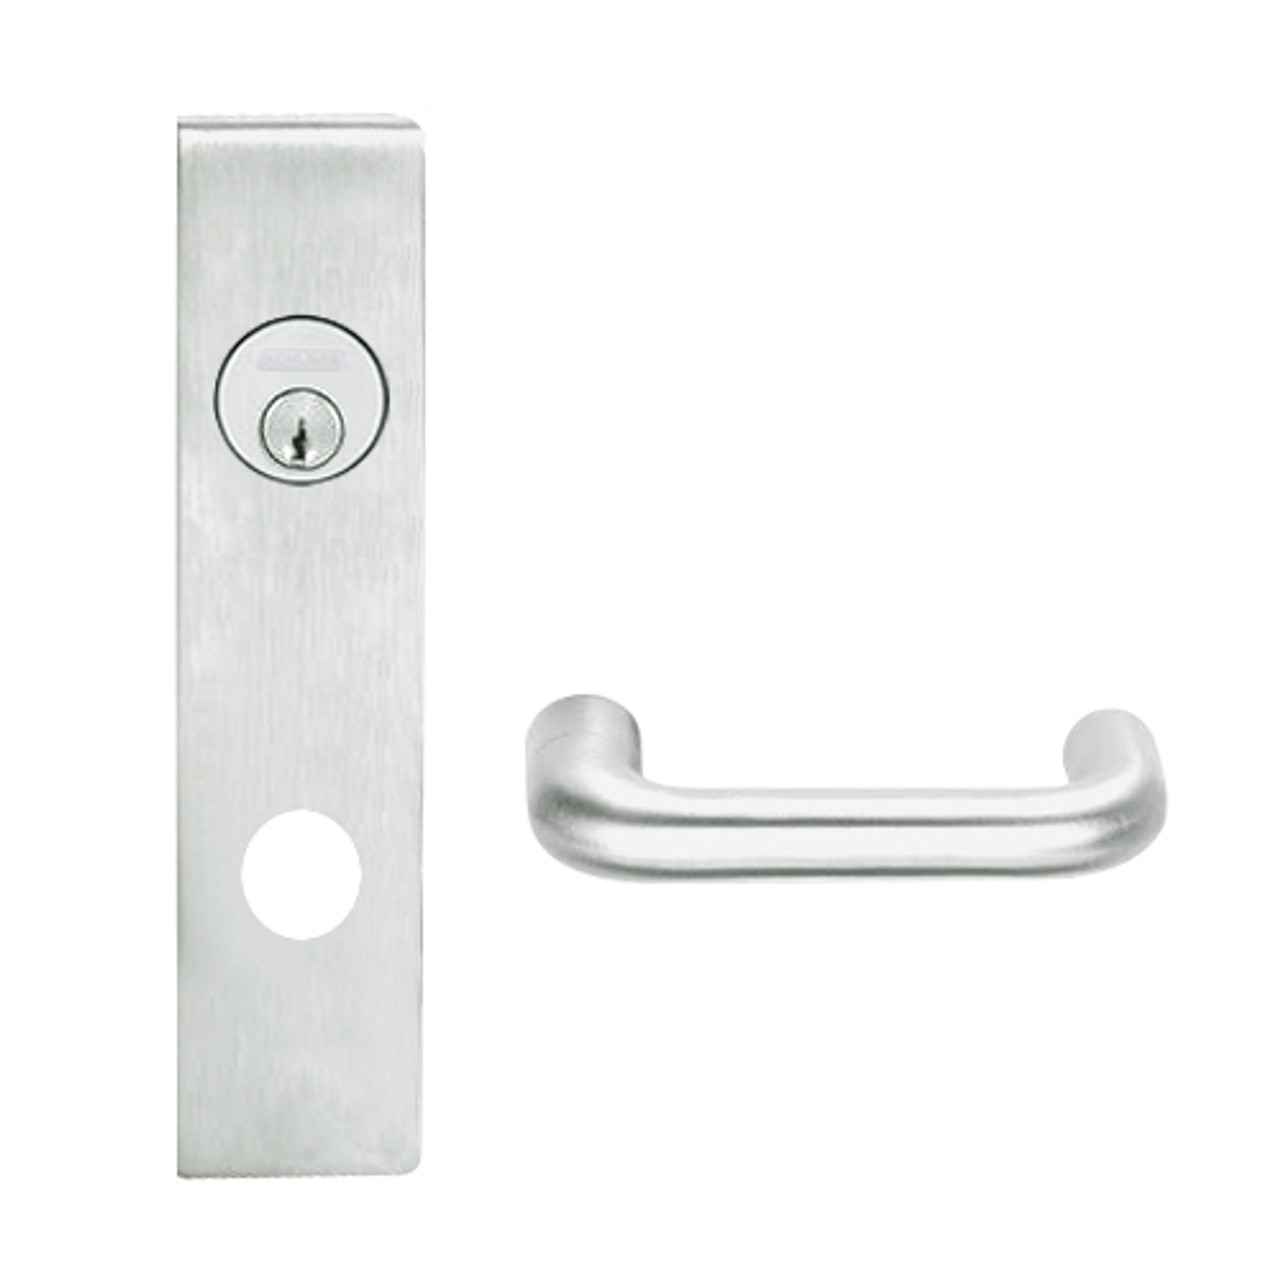 L9026P-03L-619 Schlage L Series Exit Lock with Cylinder Commercial Mortise Lock with 03 Cast Lever Design in Satin Nickel